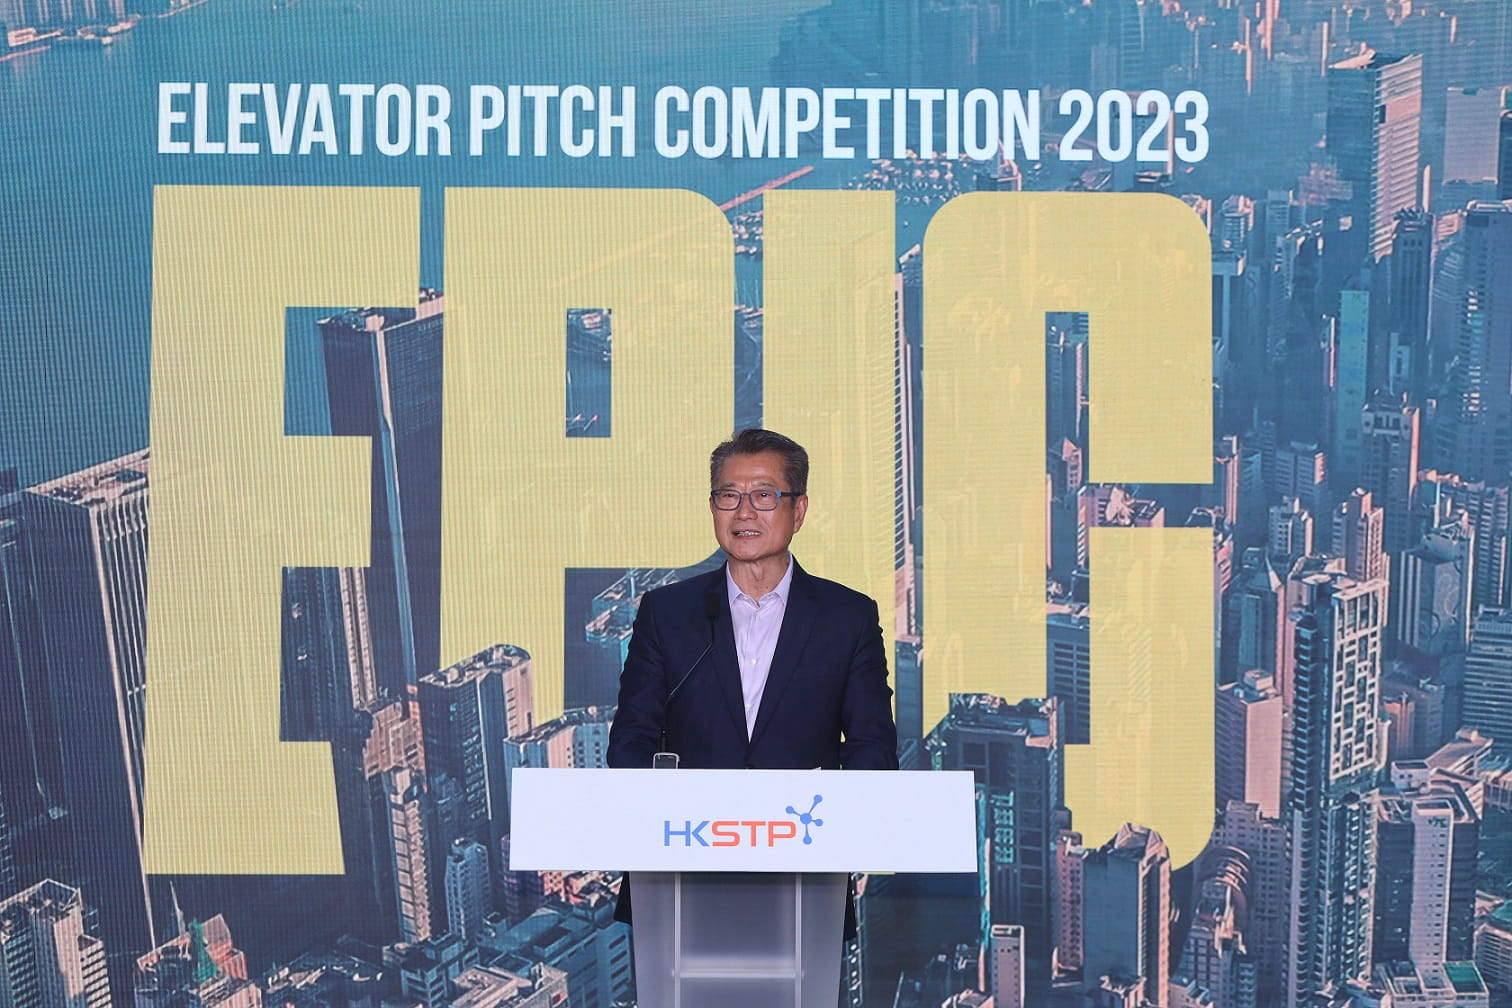 photo2HKSTP CROWNS OVERALL CHAMPION SKYLAND INNOVATION AT EPIC 2023 PITCHING COMPETITION BEATING OVE